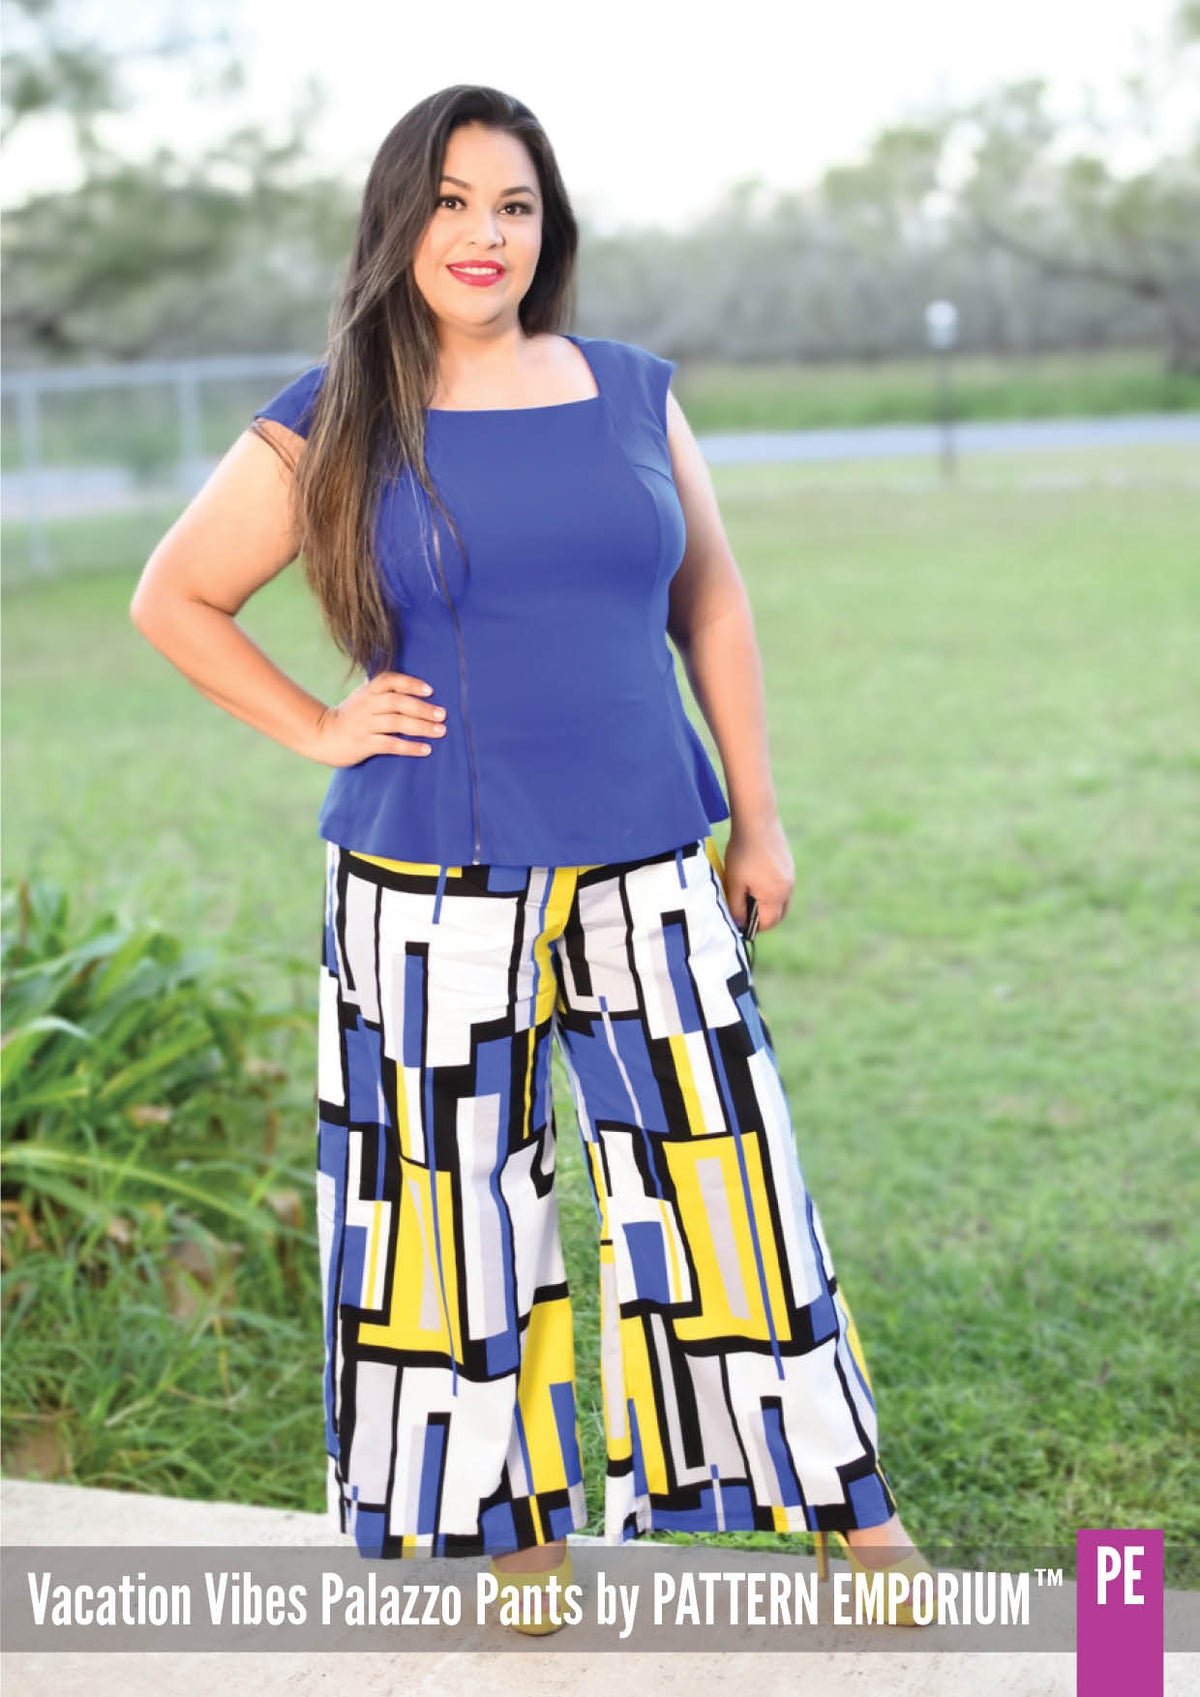 Final Sale Plus Size Palazzo Pants in Multi Color Floral Print – Chic And  Curvy